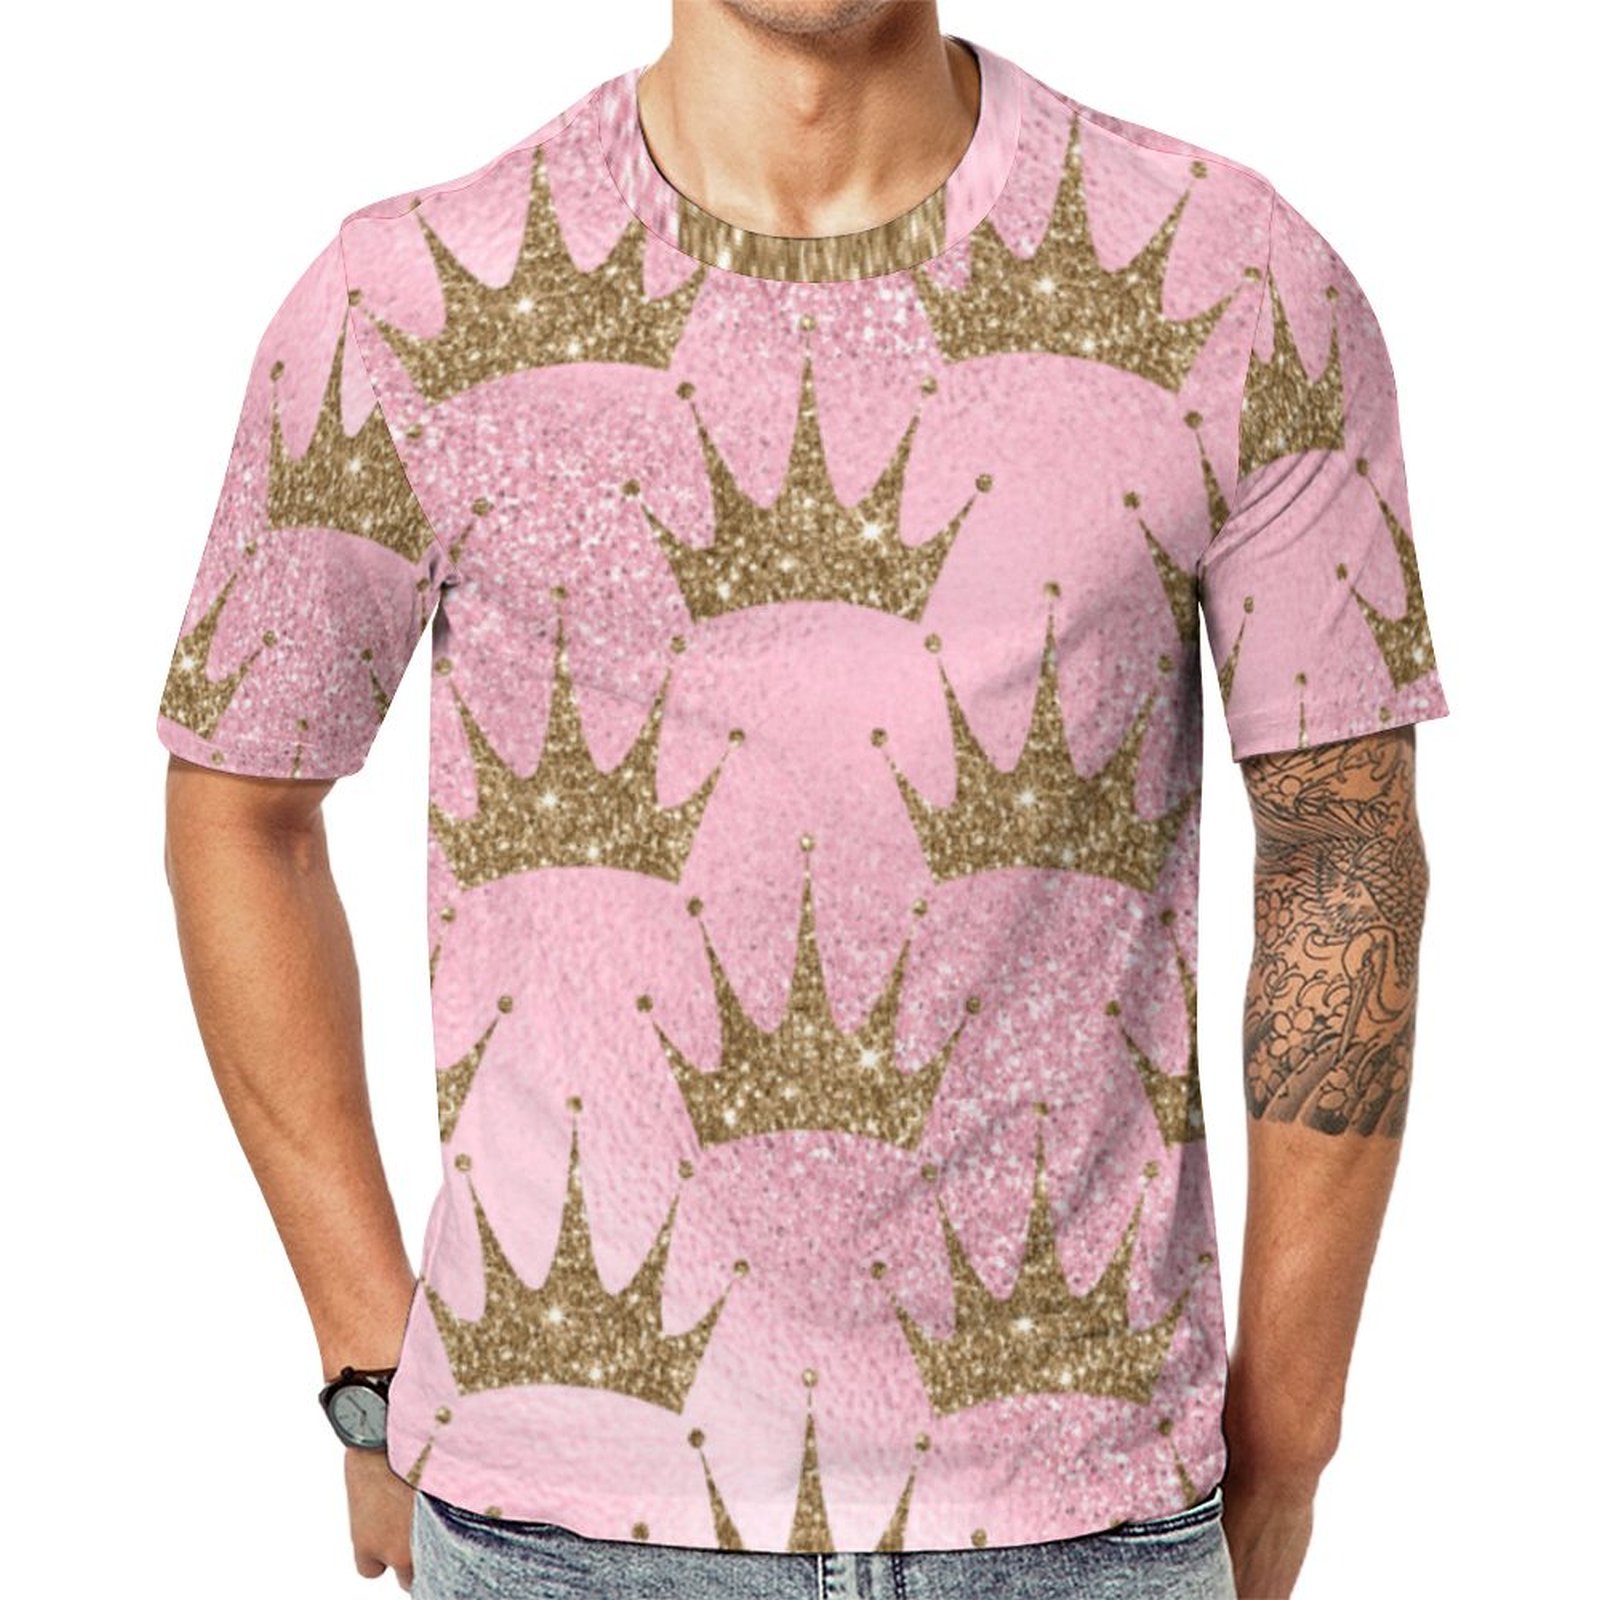 Golden Crown On Pink Glitter Short Sleeve Print Unisex Tshirt Summer Casual Tees for Men and Women Coolcoshirts